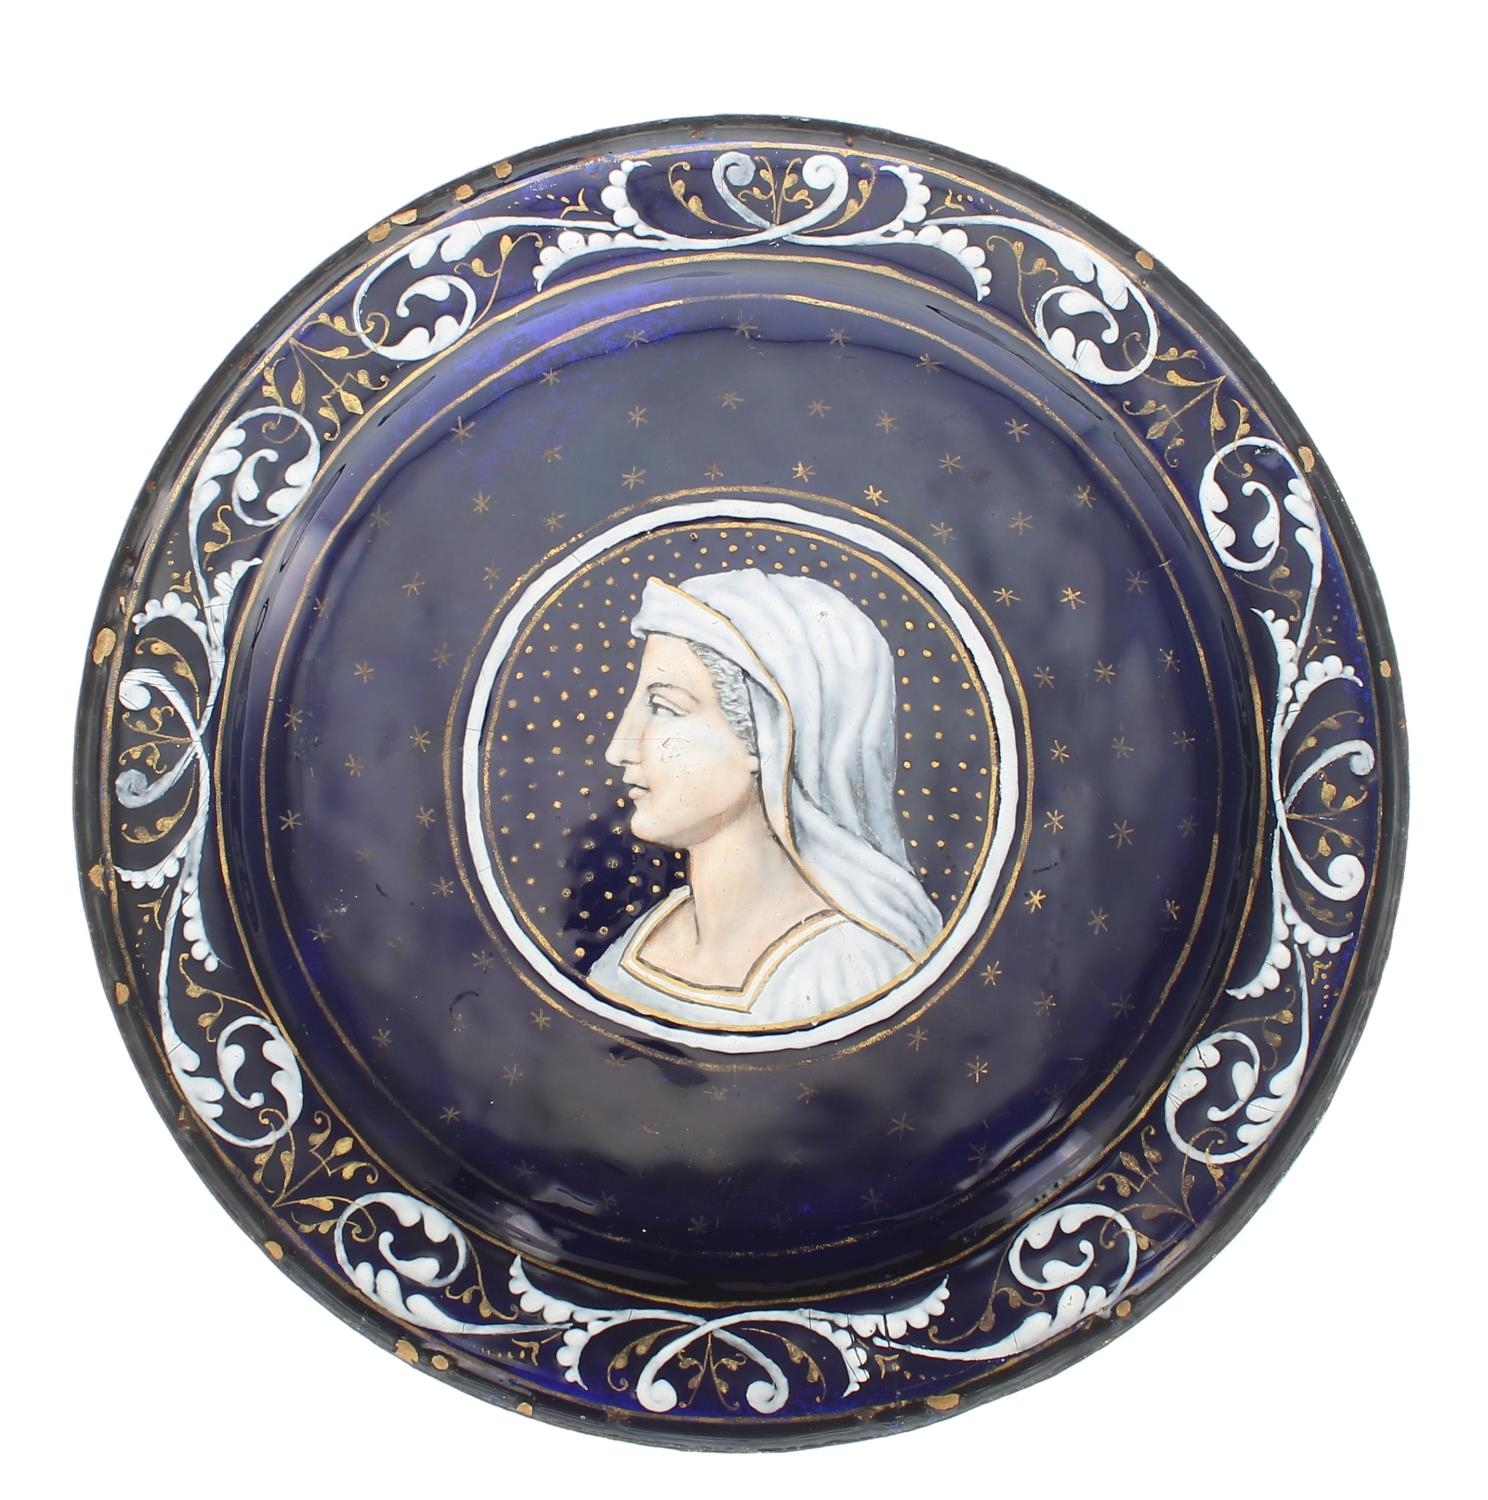 Limoges circular enamel plate in the style of  the style of Pierre Reymond, depicting a classical - Image 2 of 2